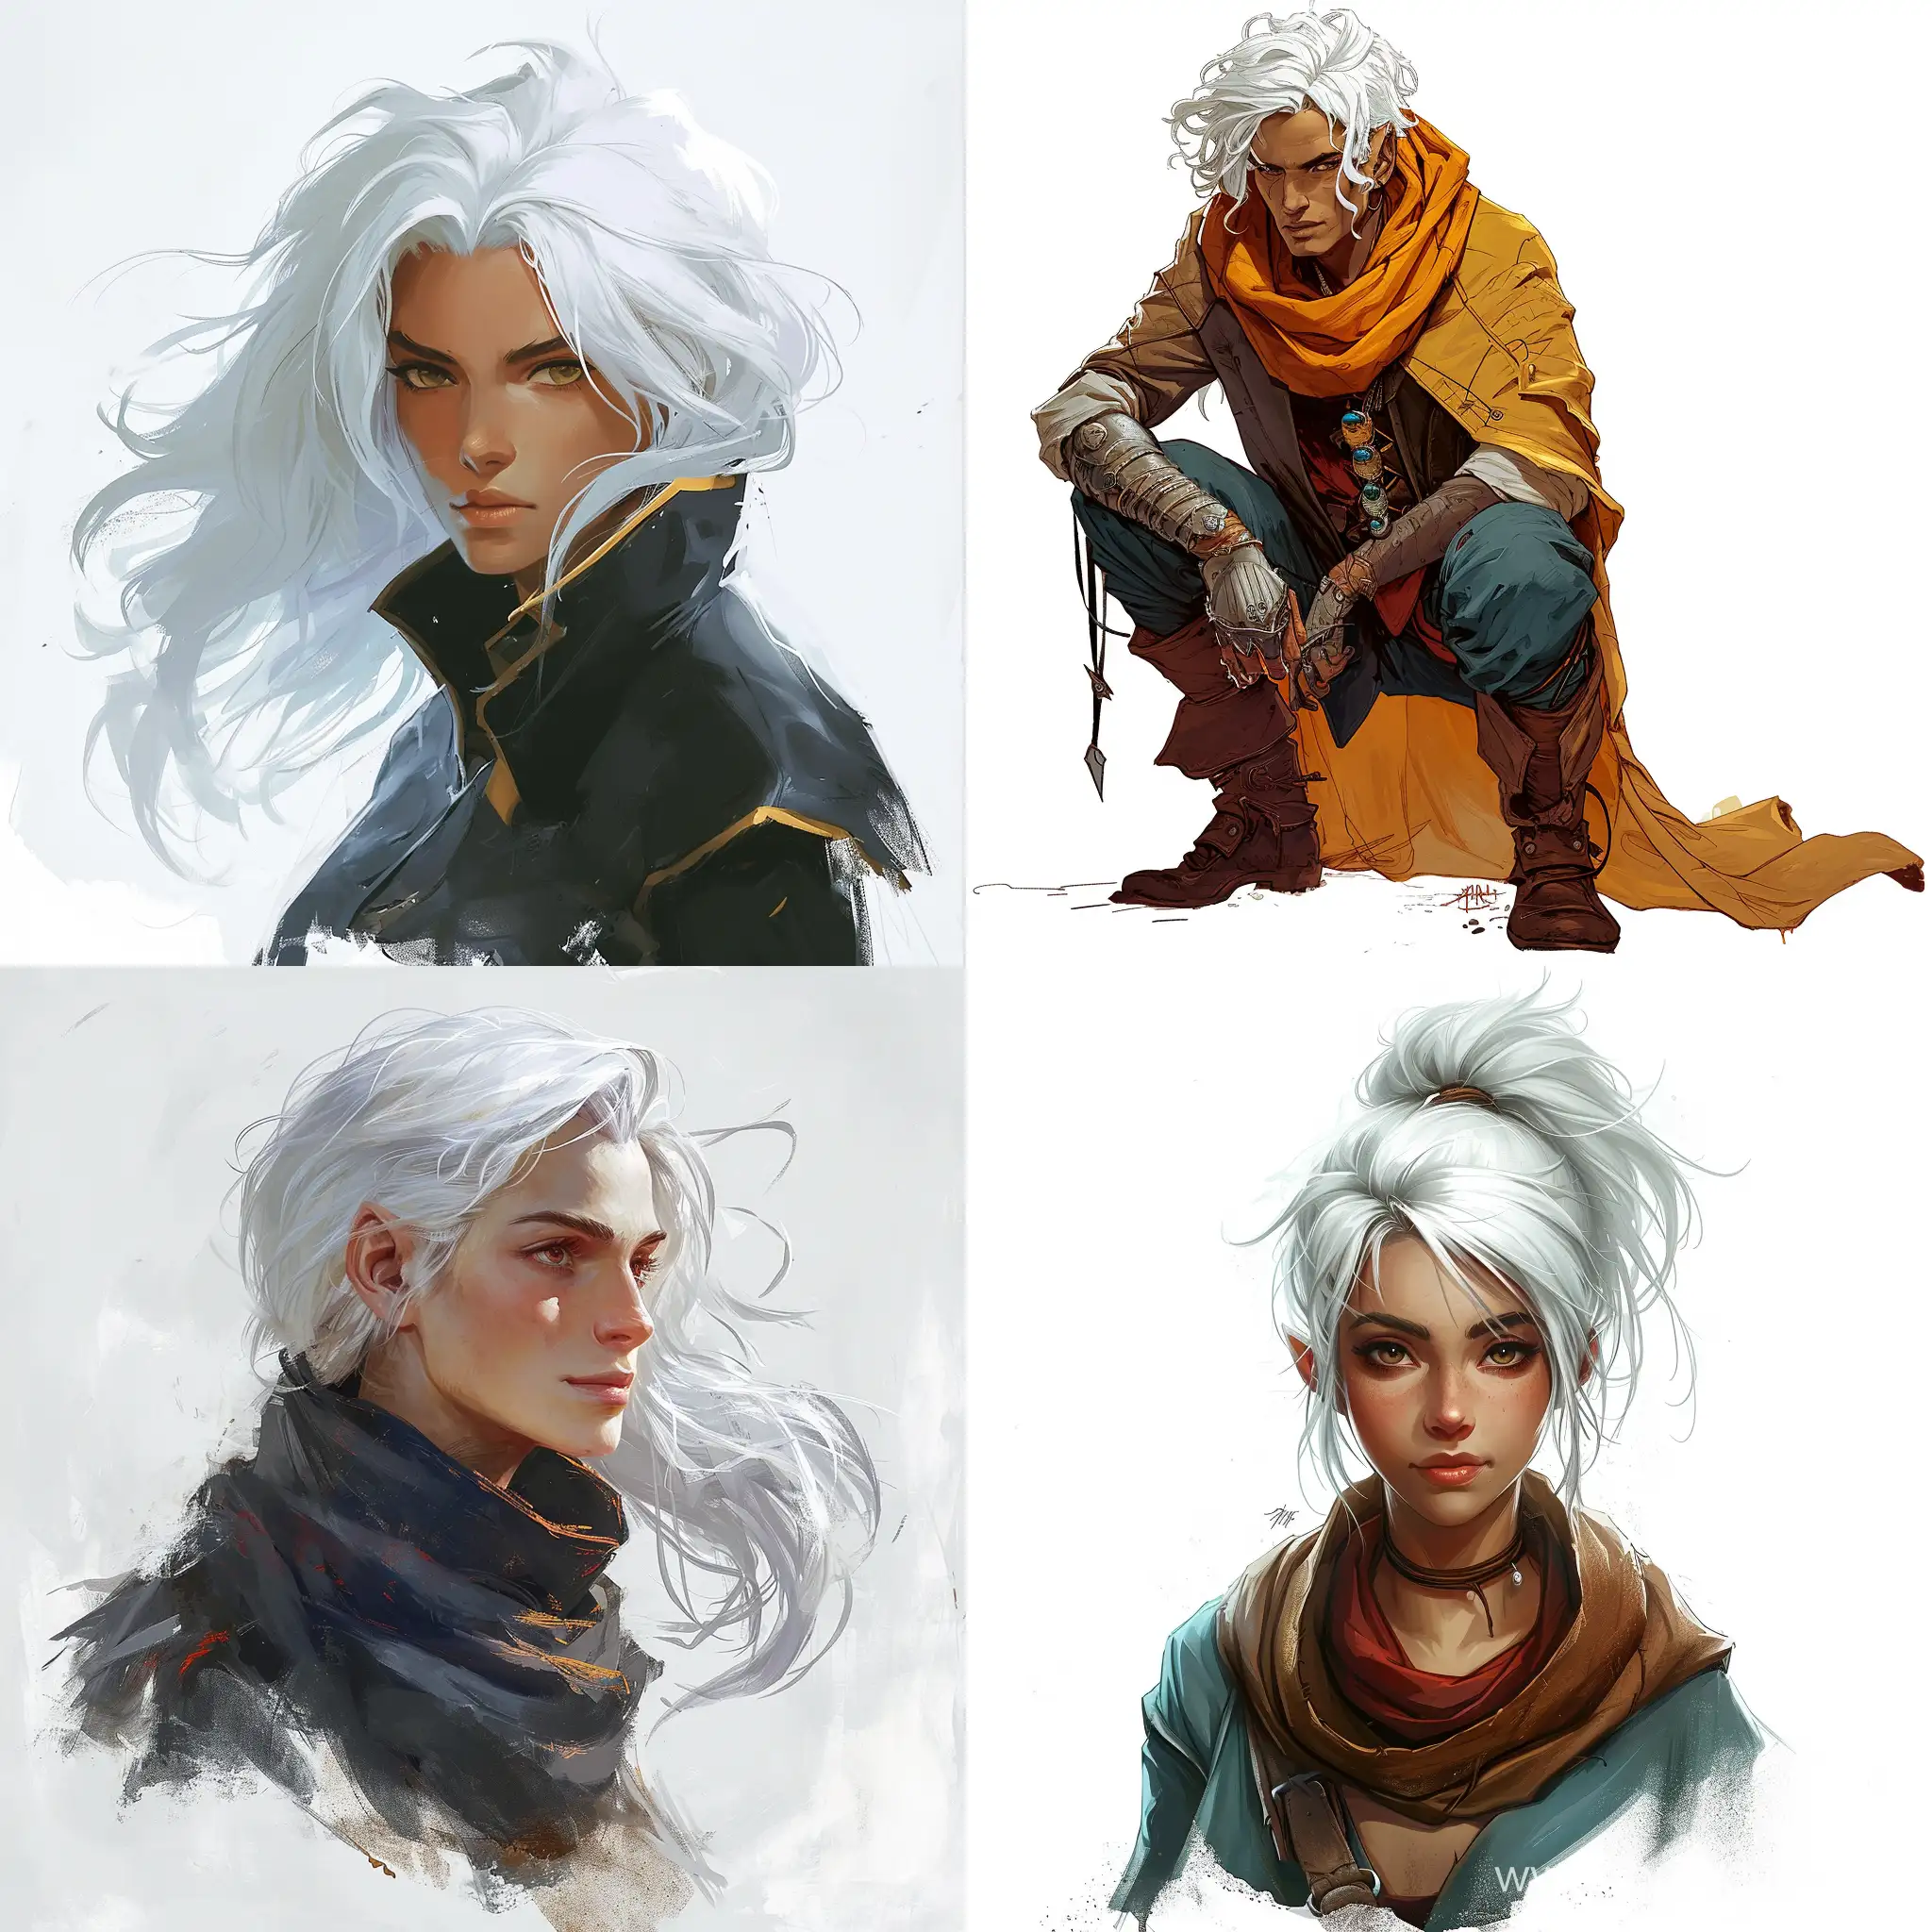 Mysterious-DND-Character-with-White-Hair-in-Full-Growth